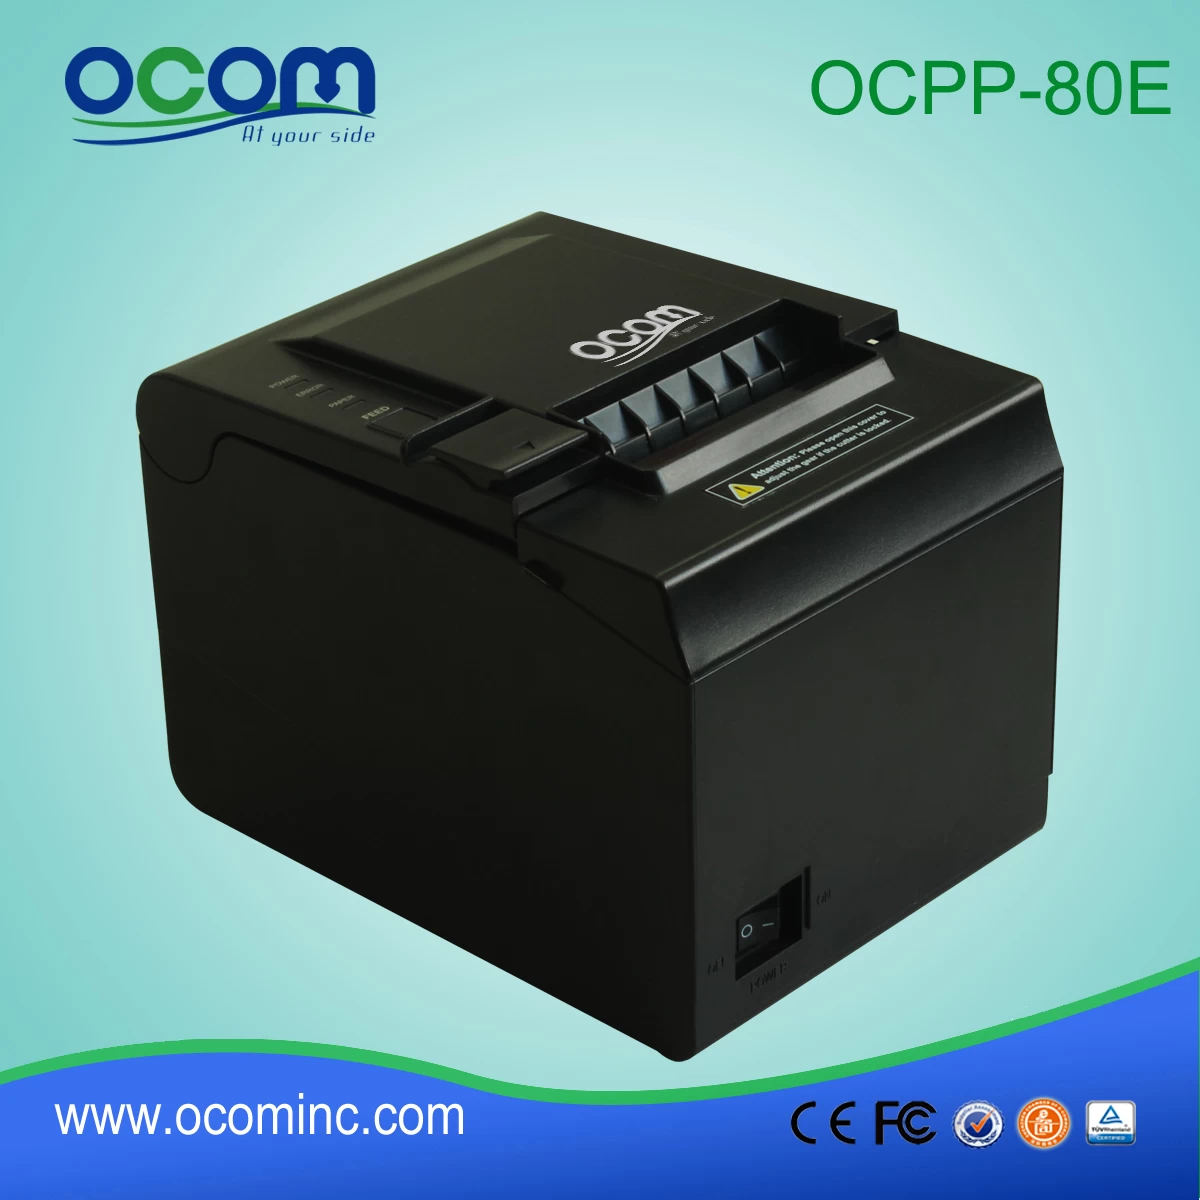 OCPP-80E---China low cost thermal receipt printer price